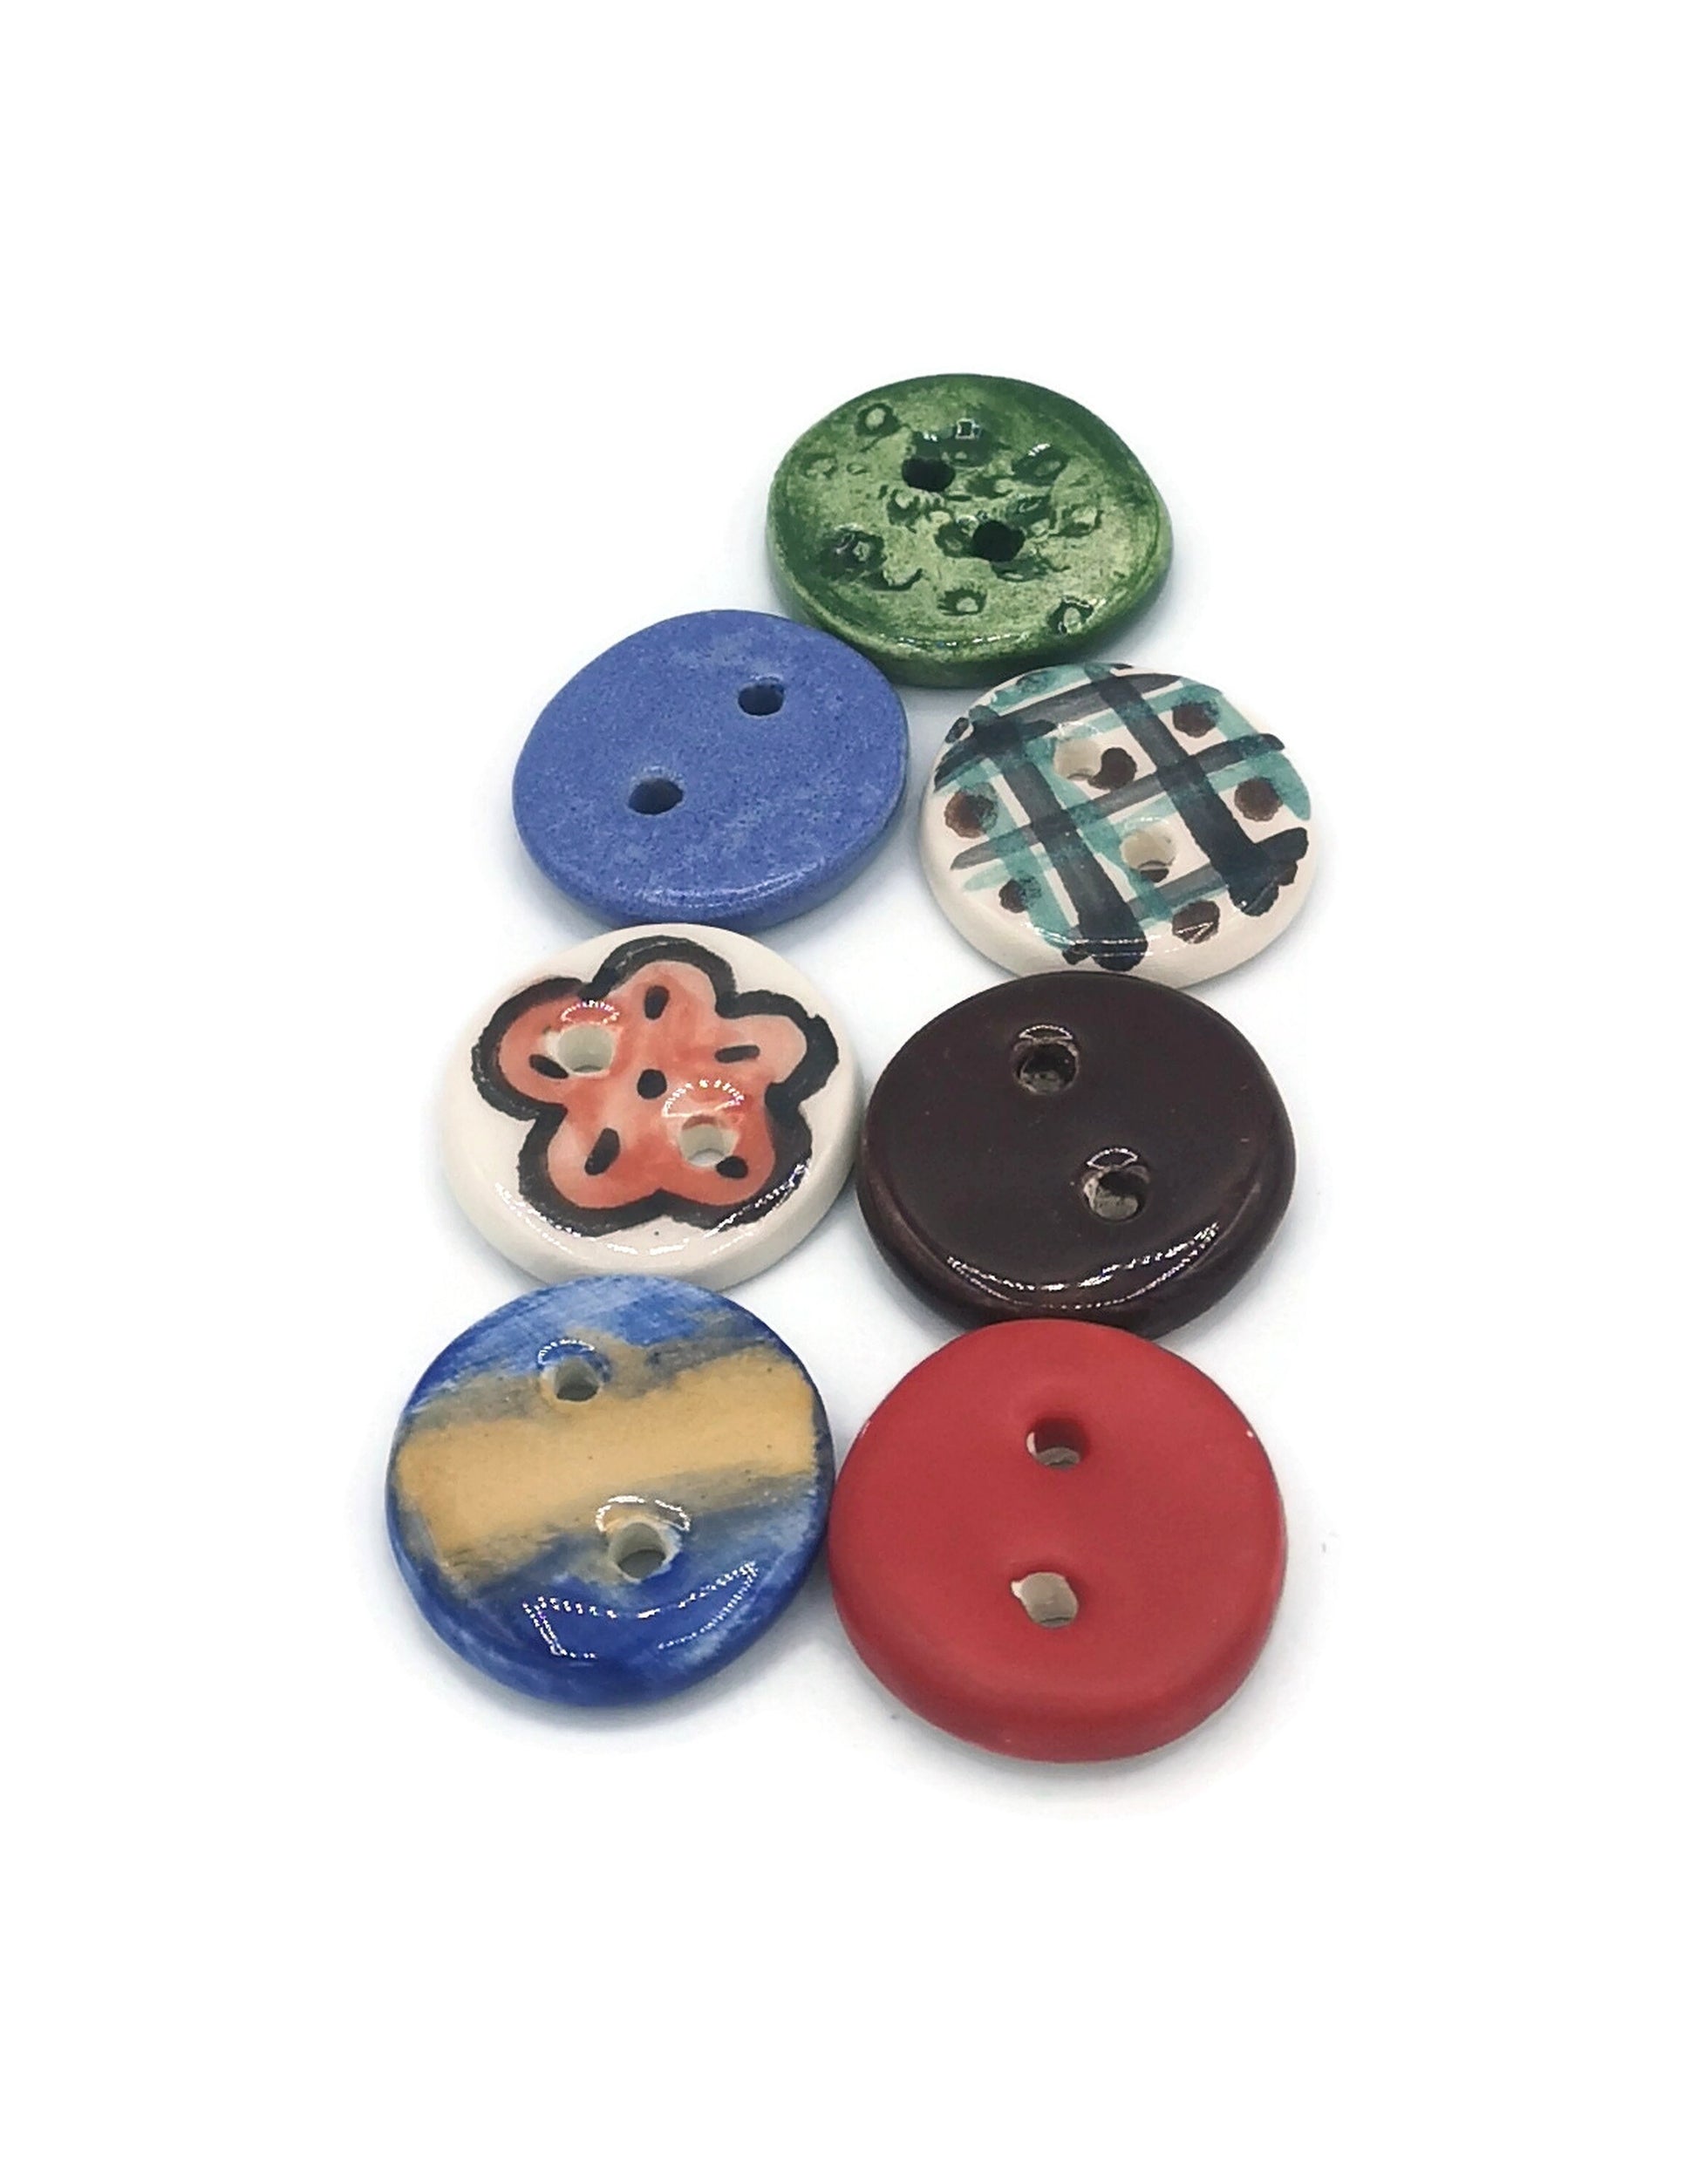 7Pc 30mm Handmade Ceramic Sewing Buttons, Cute Round Buttons, Sewing Suplies And Notions, Best Sellers Jewelry Making Buttons Vintage Look - Ceramica Ana Rafael